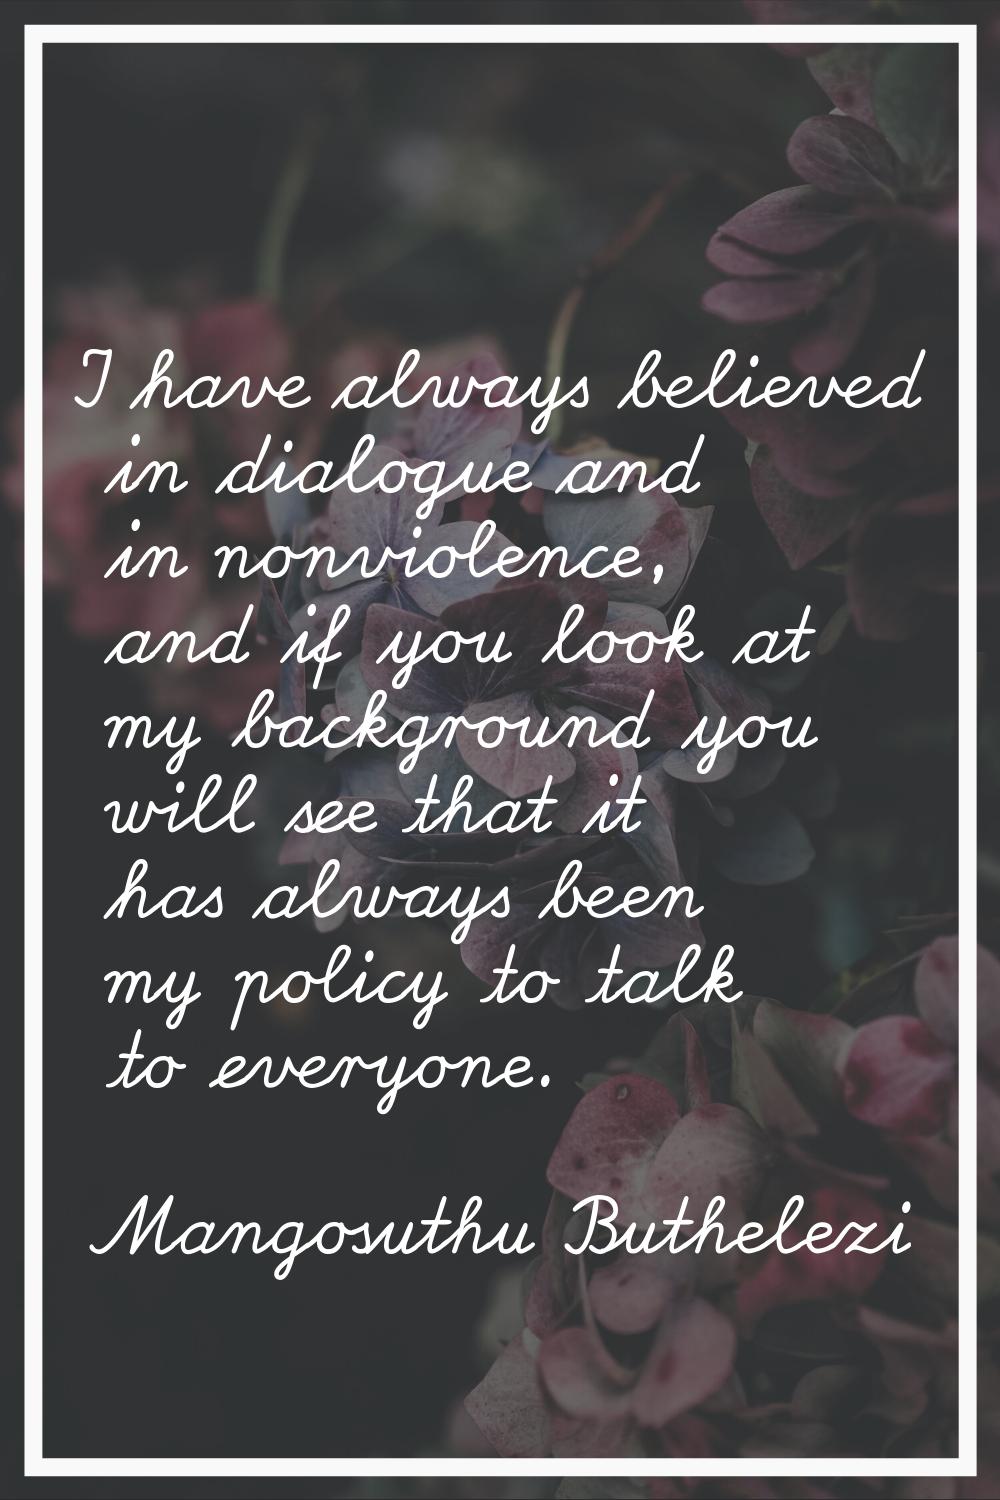 I have always believed in dialogue and in nonviolence, and if you look at my background you will se